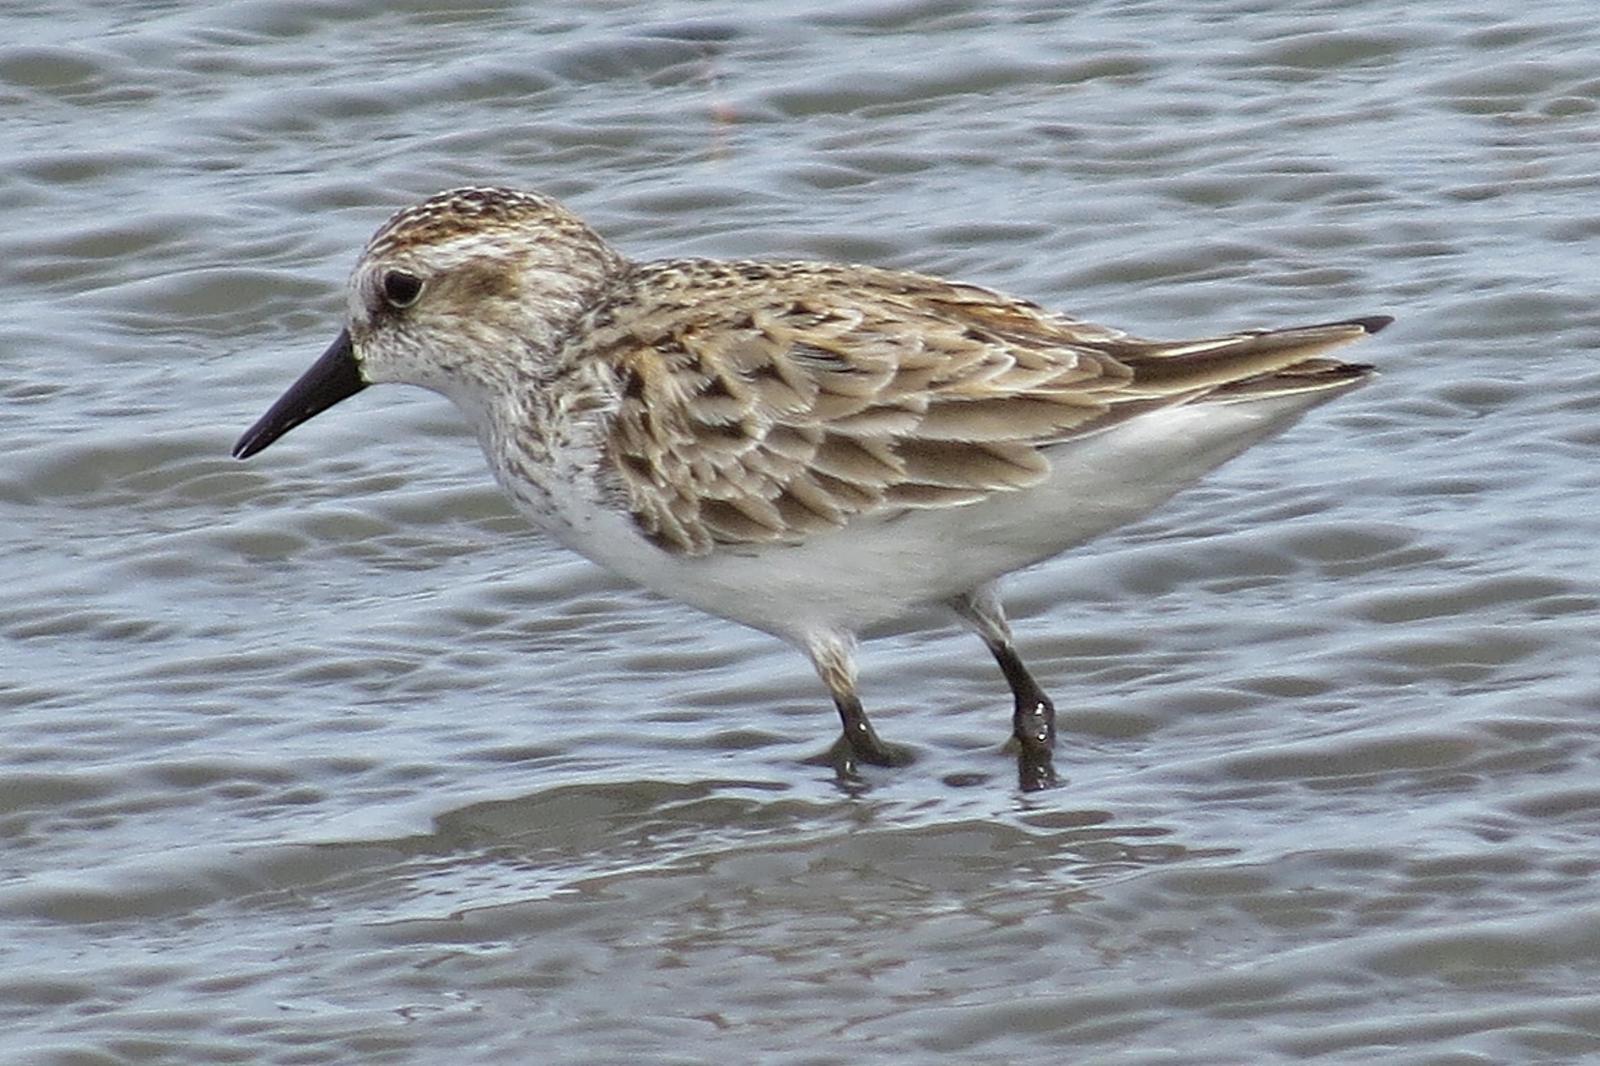 Semipalmated Sandpiper Photo by Enid Bachman